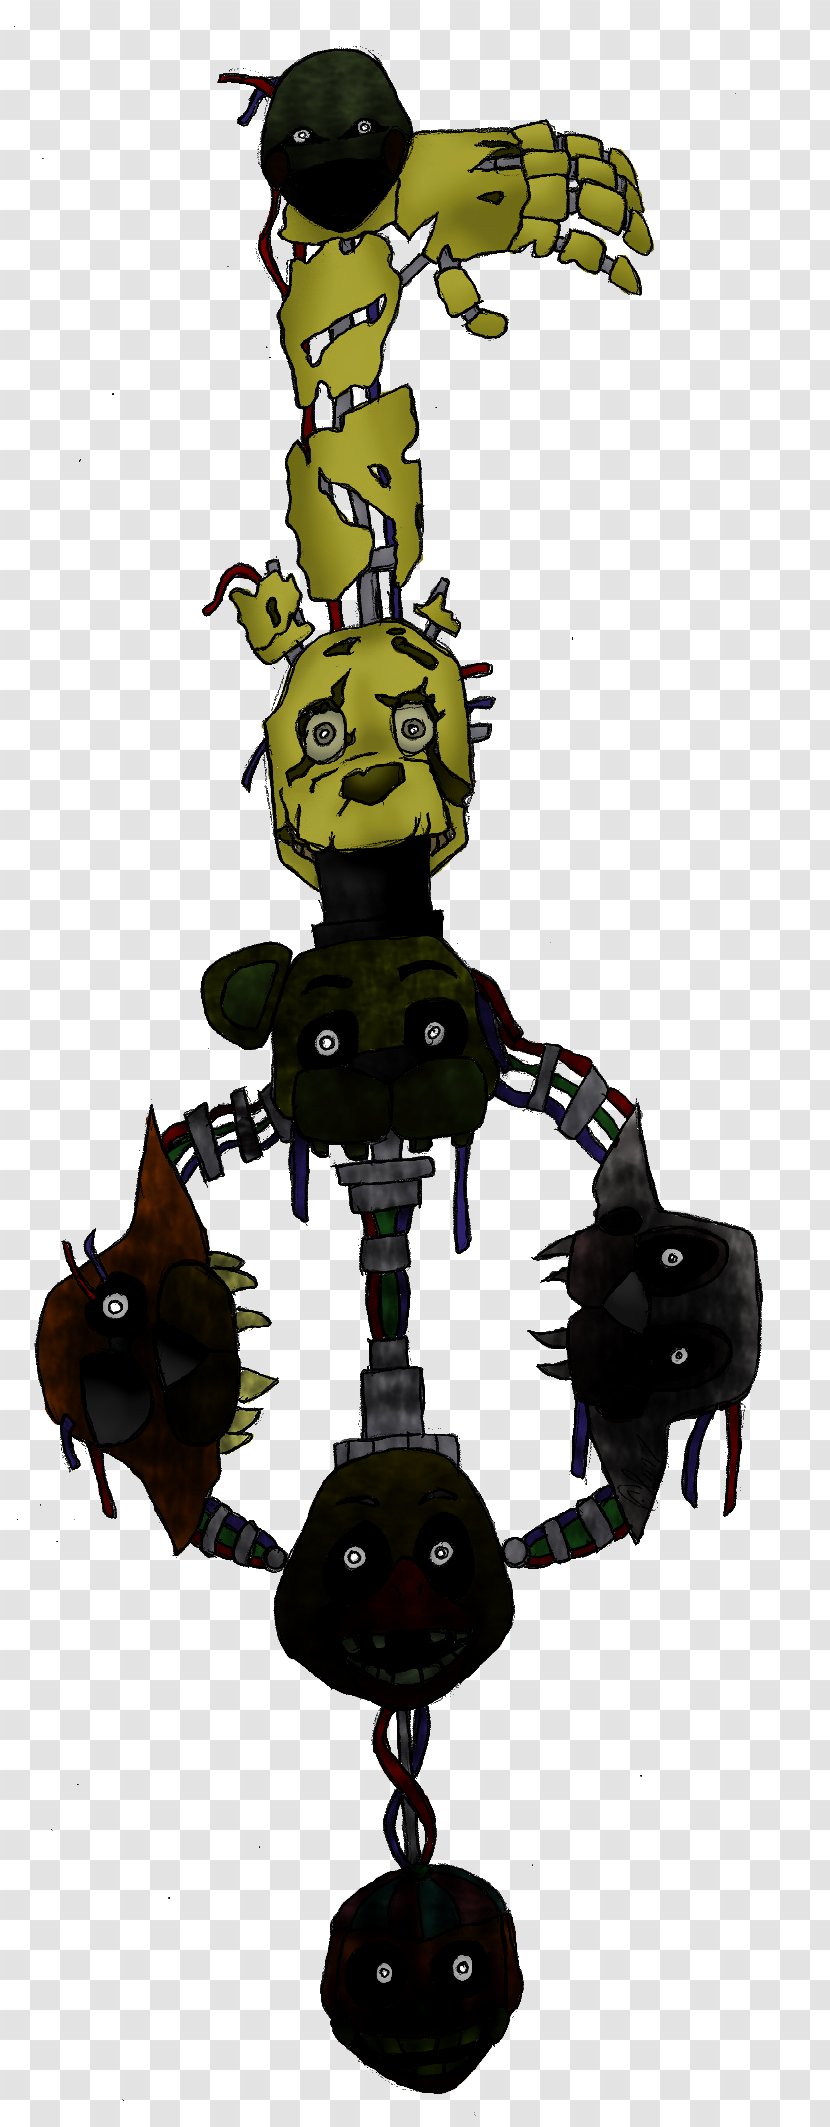 Five Nights At Freddy's 3 Kingdom Hearts χ Freddy's: Sister Location Animatronics - Television Show - Despair Transparent PNG